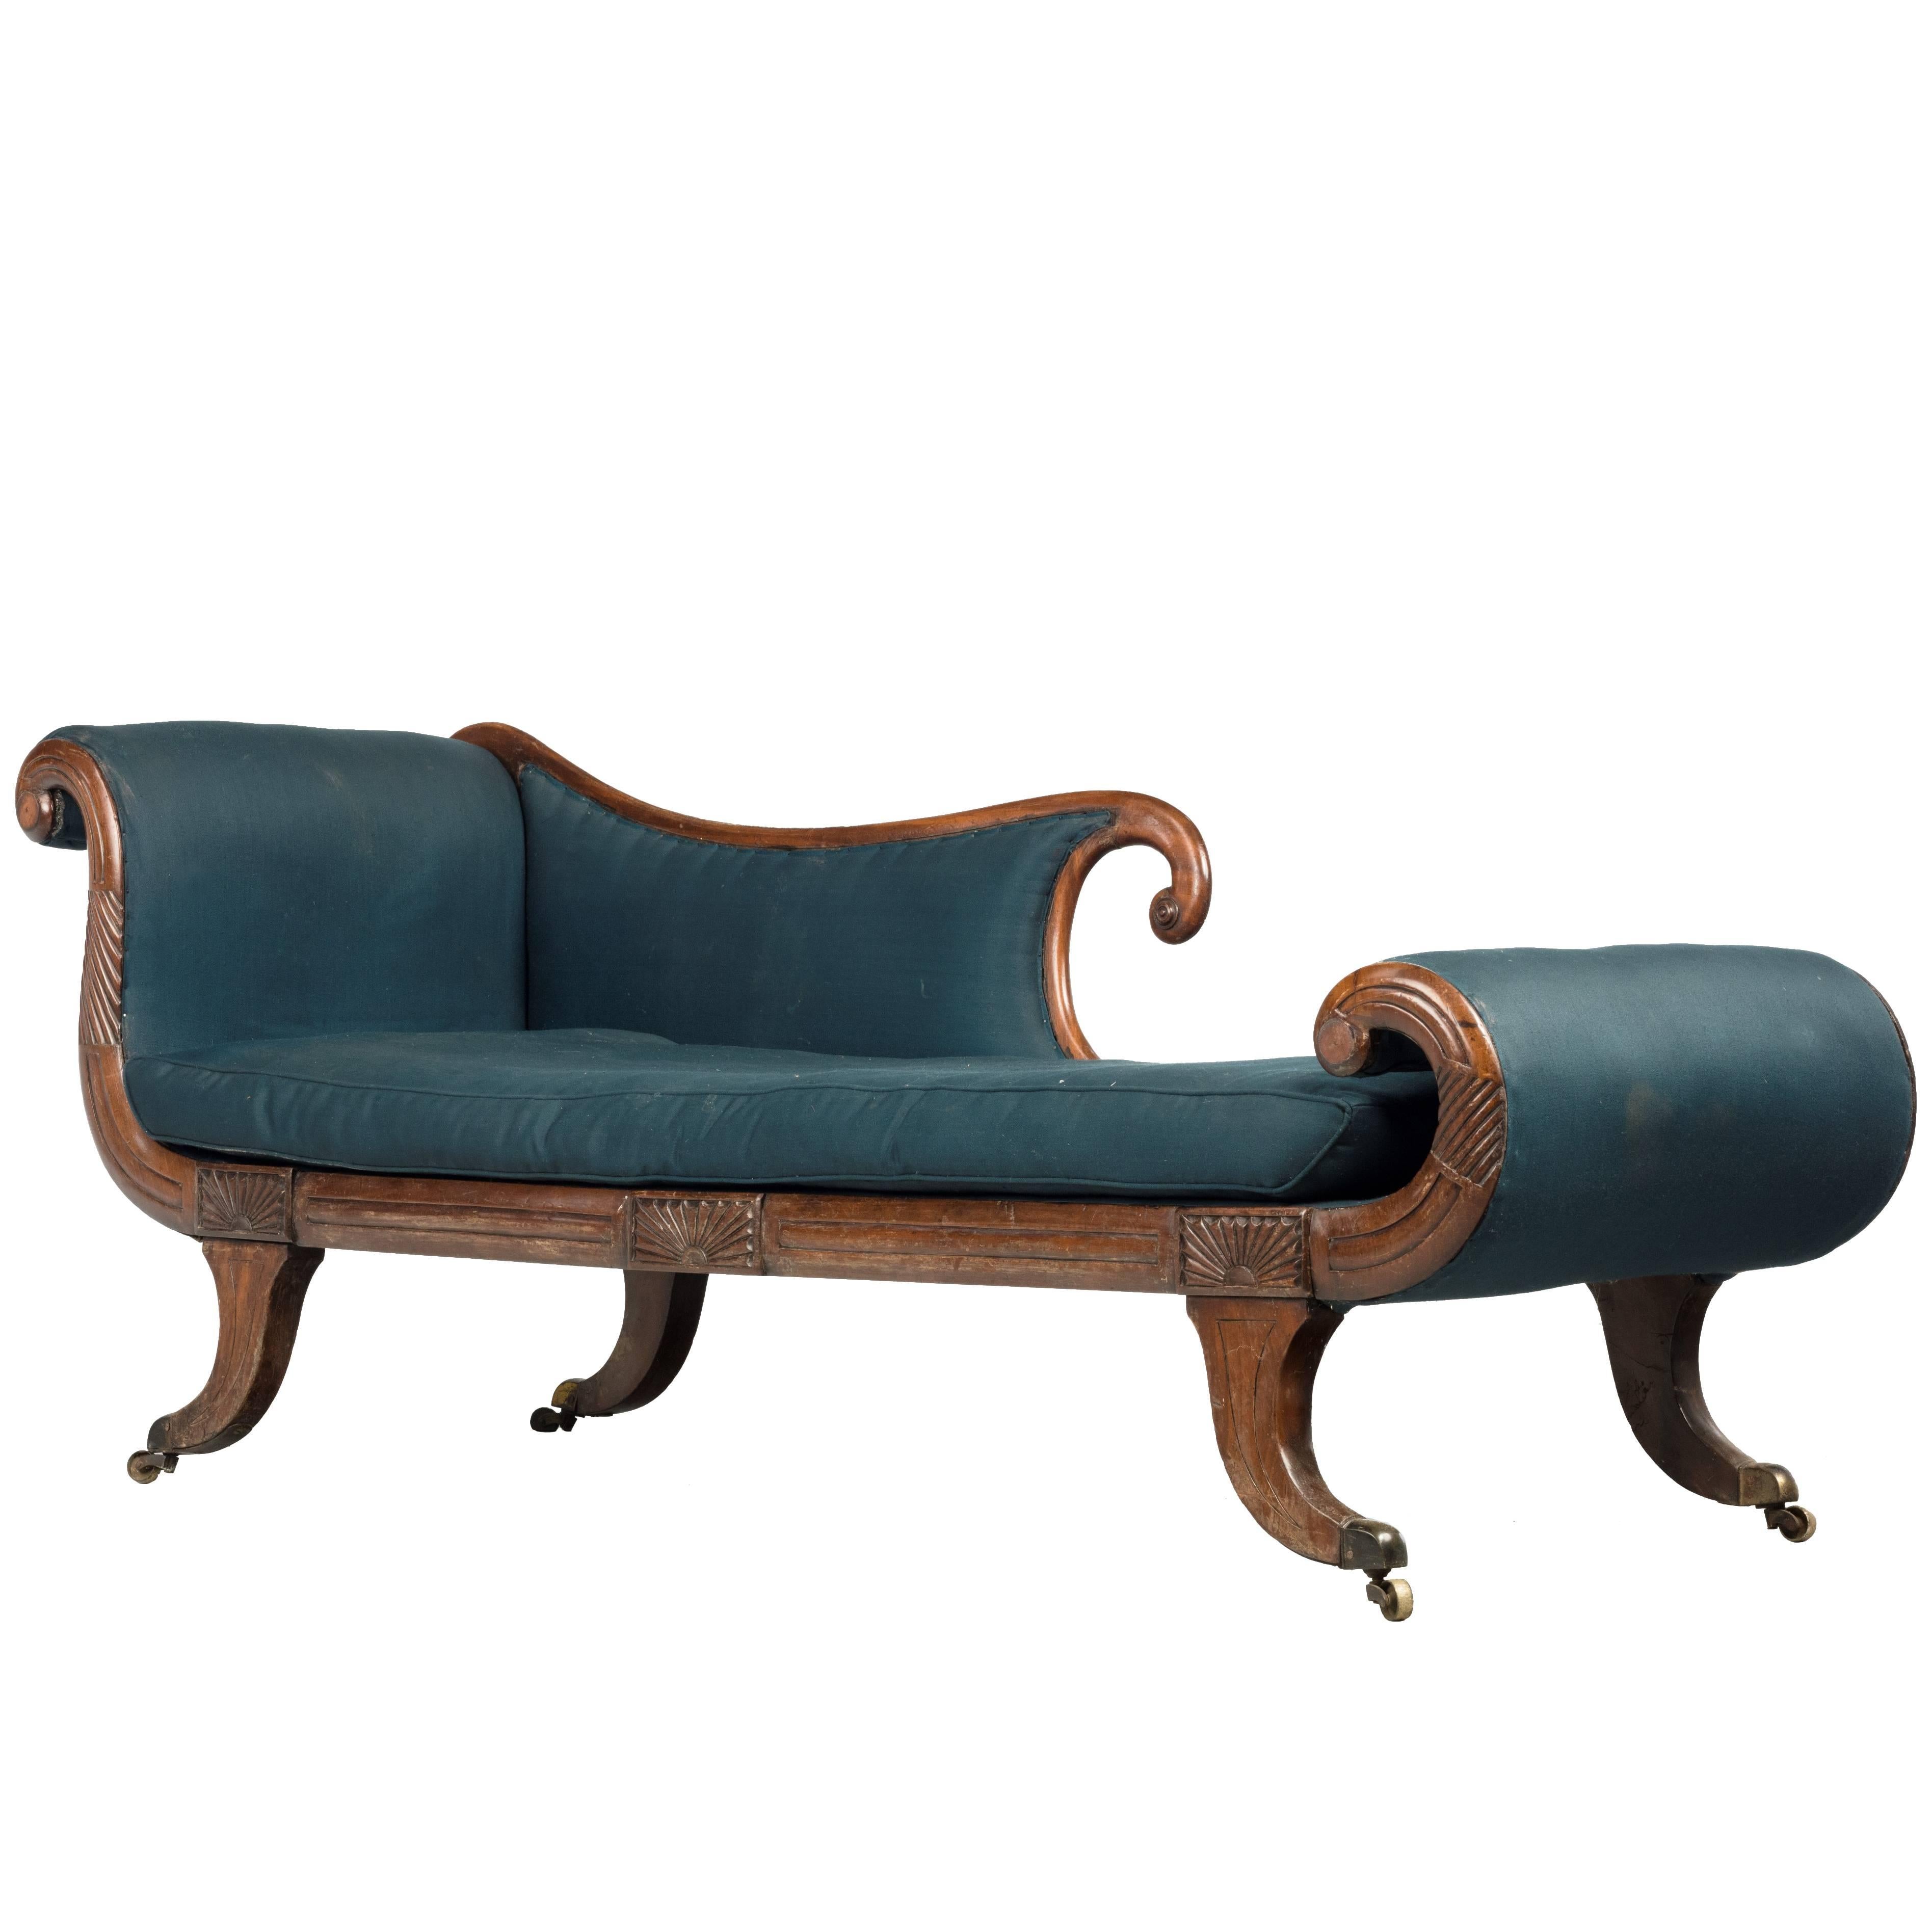 Early 19th Century Regency Period Chaise Longue